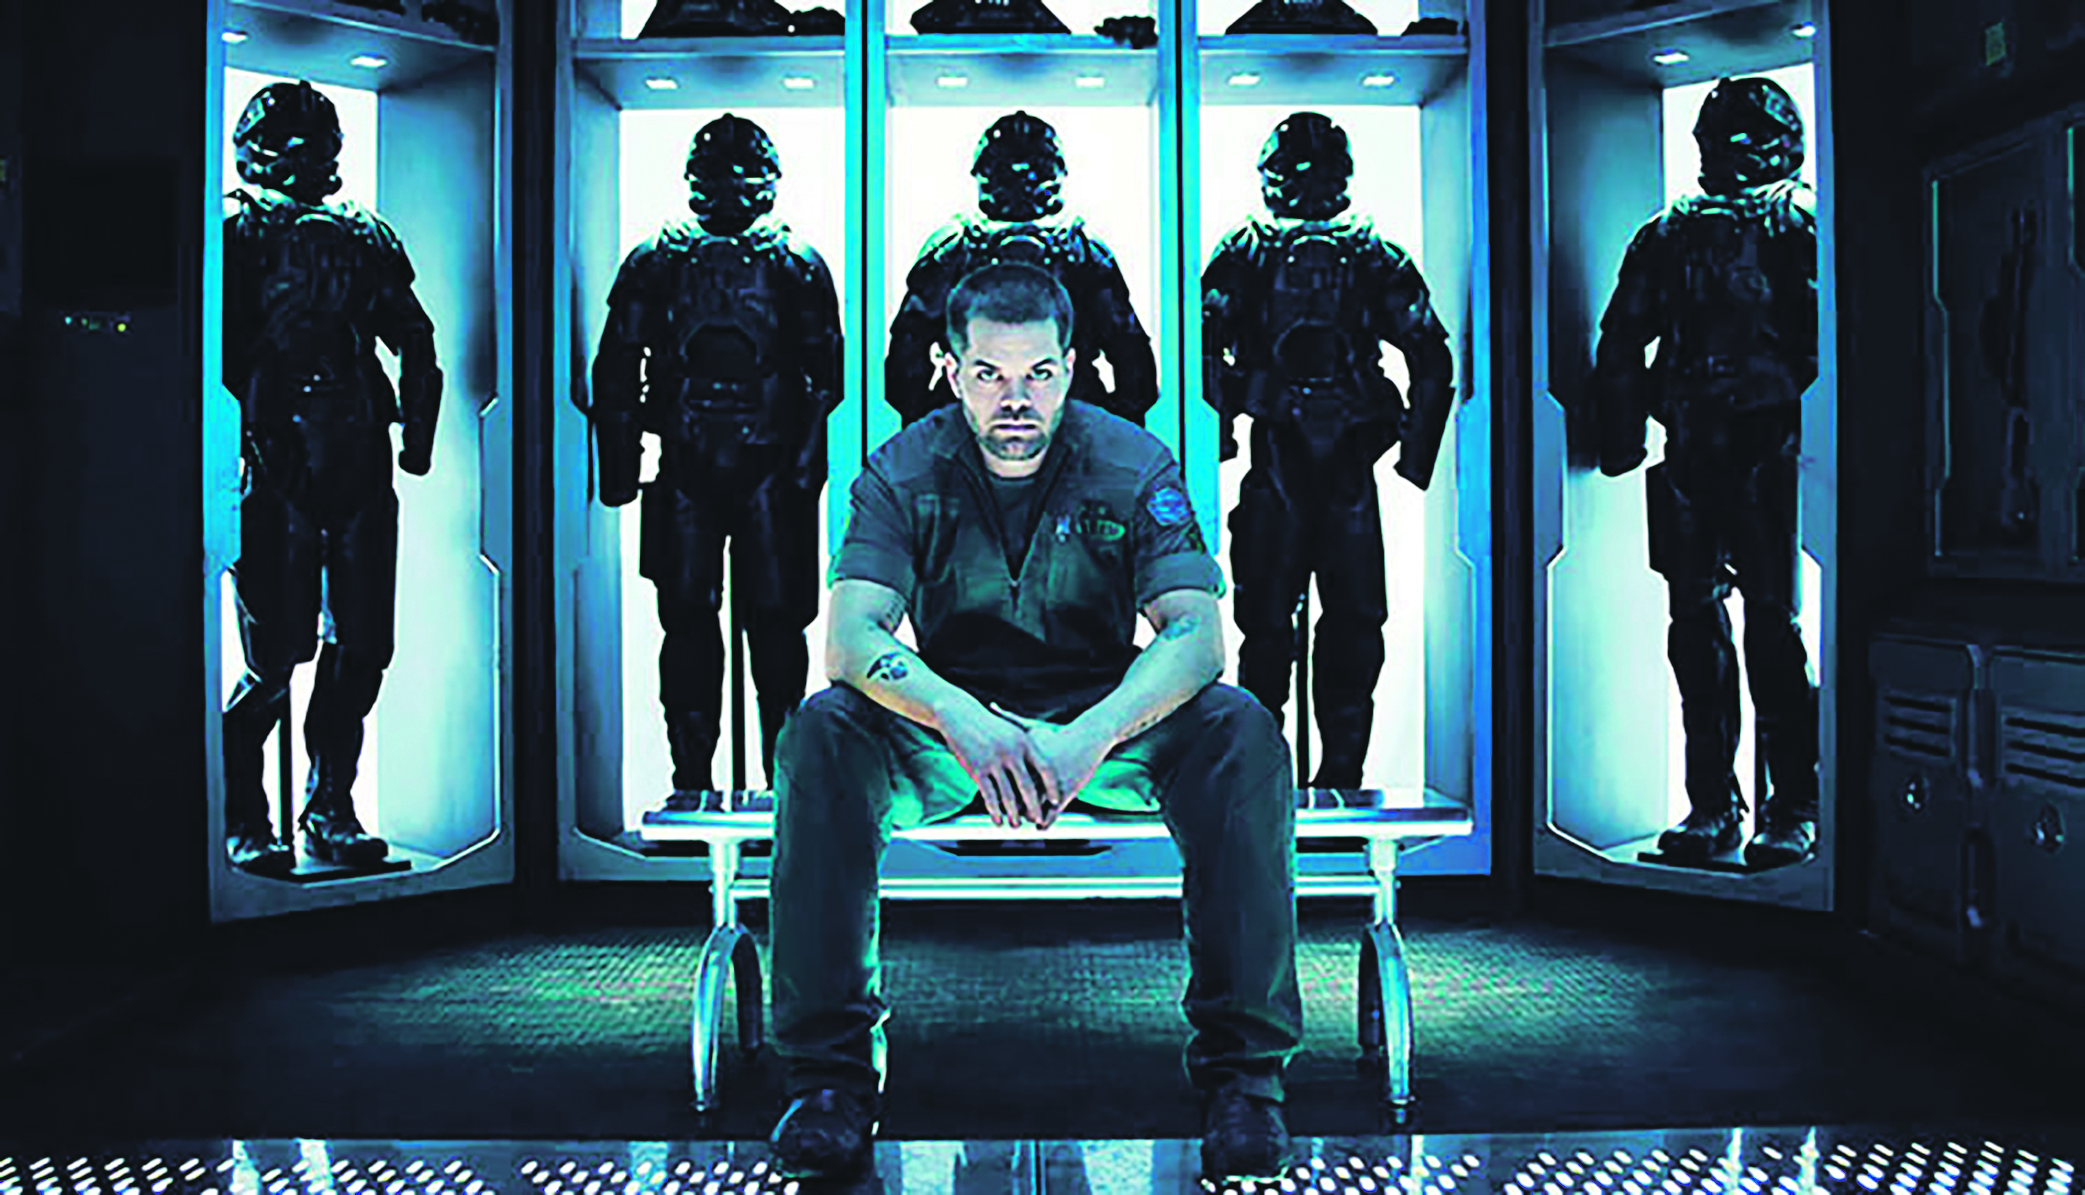 276922-352813-first-look-the-expanse-season-4-confirms-early-arrival-amazon-prime_1